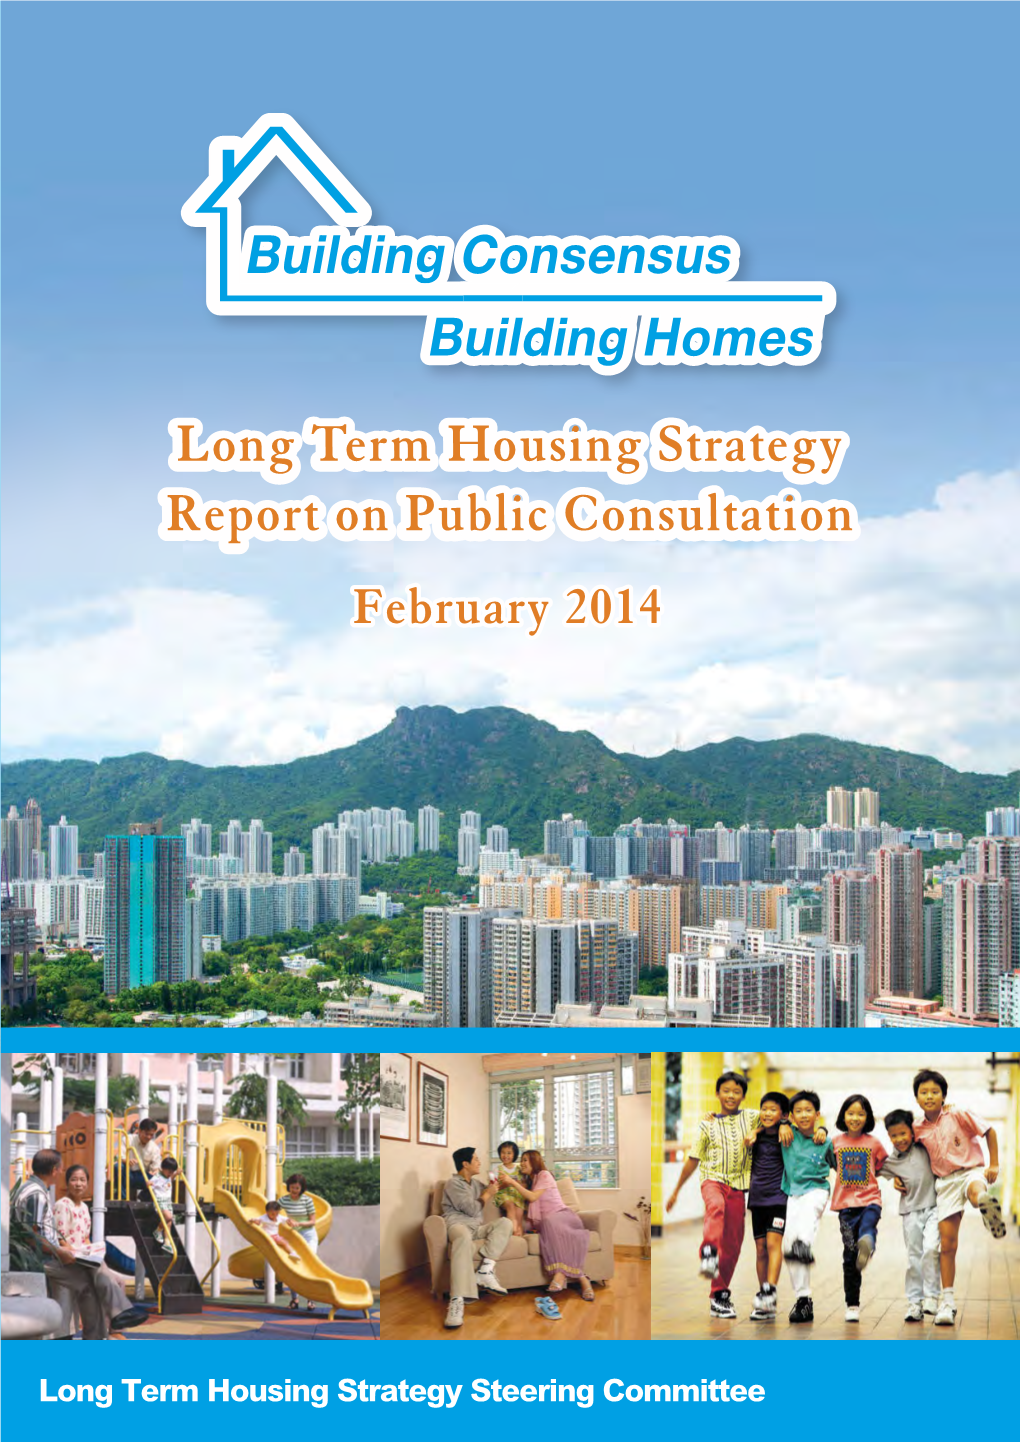 Long Term Housing Strategy Report on Public Consultation